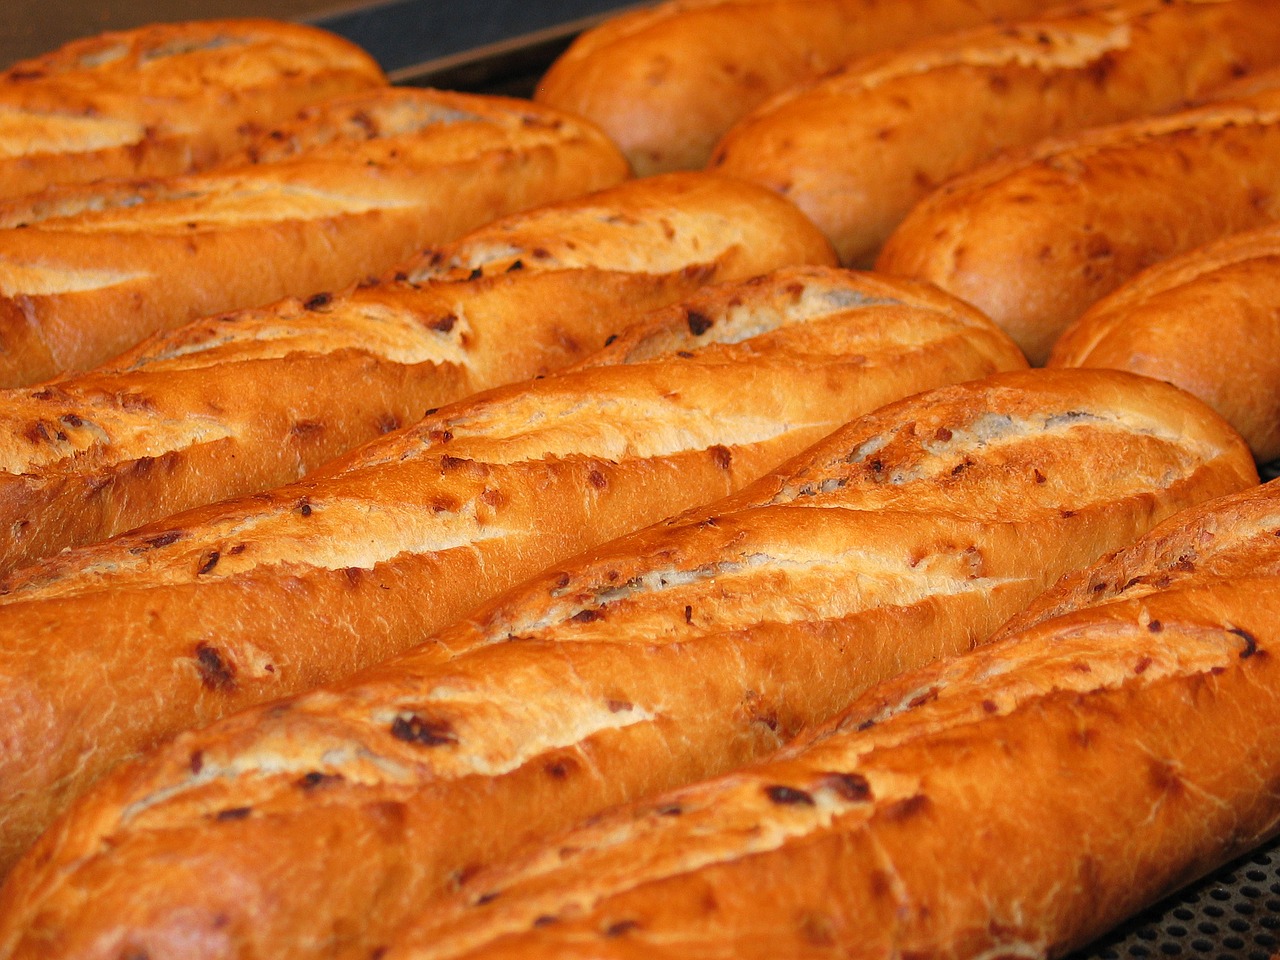 baguette bread baked goods free photo